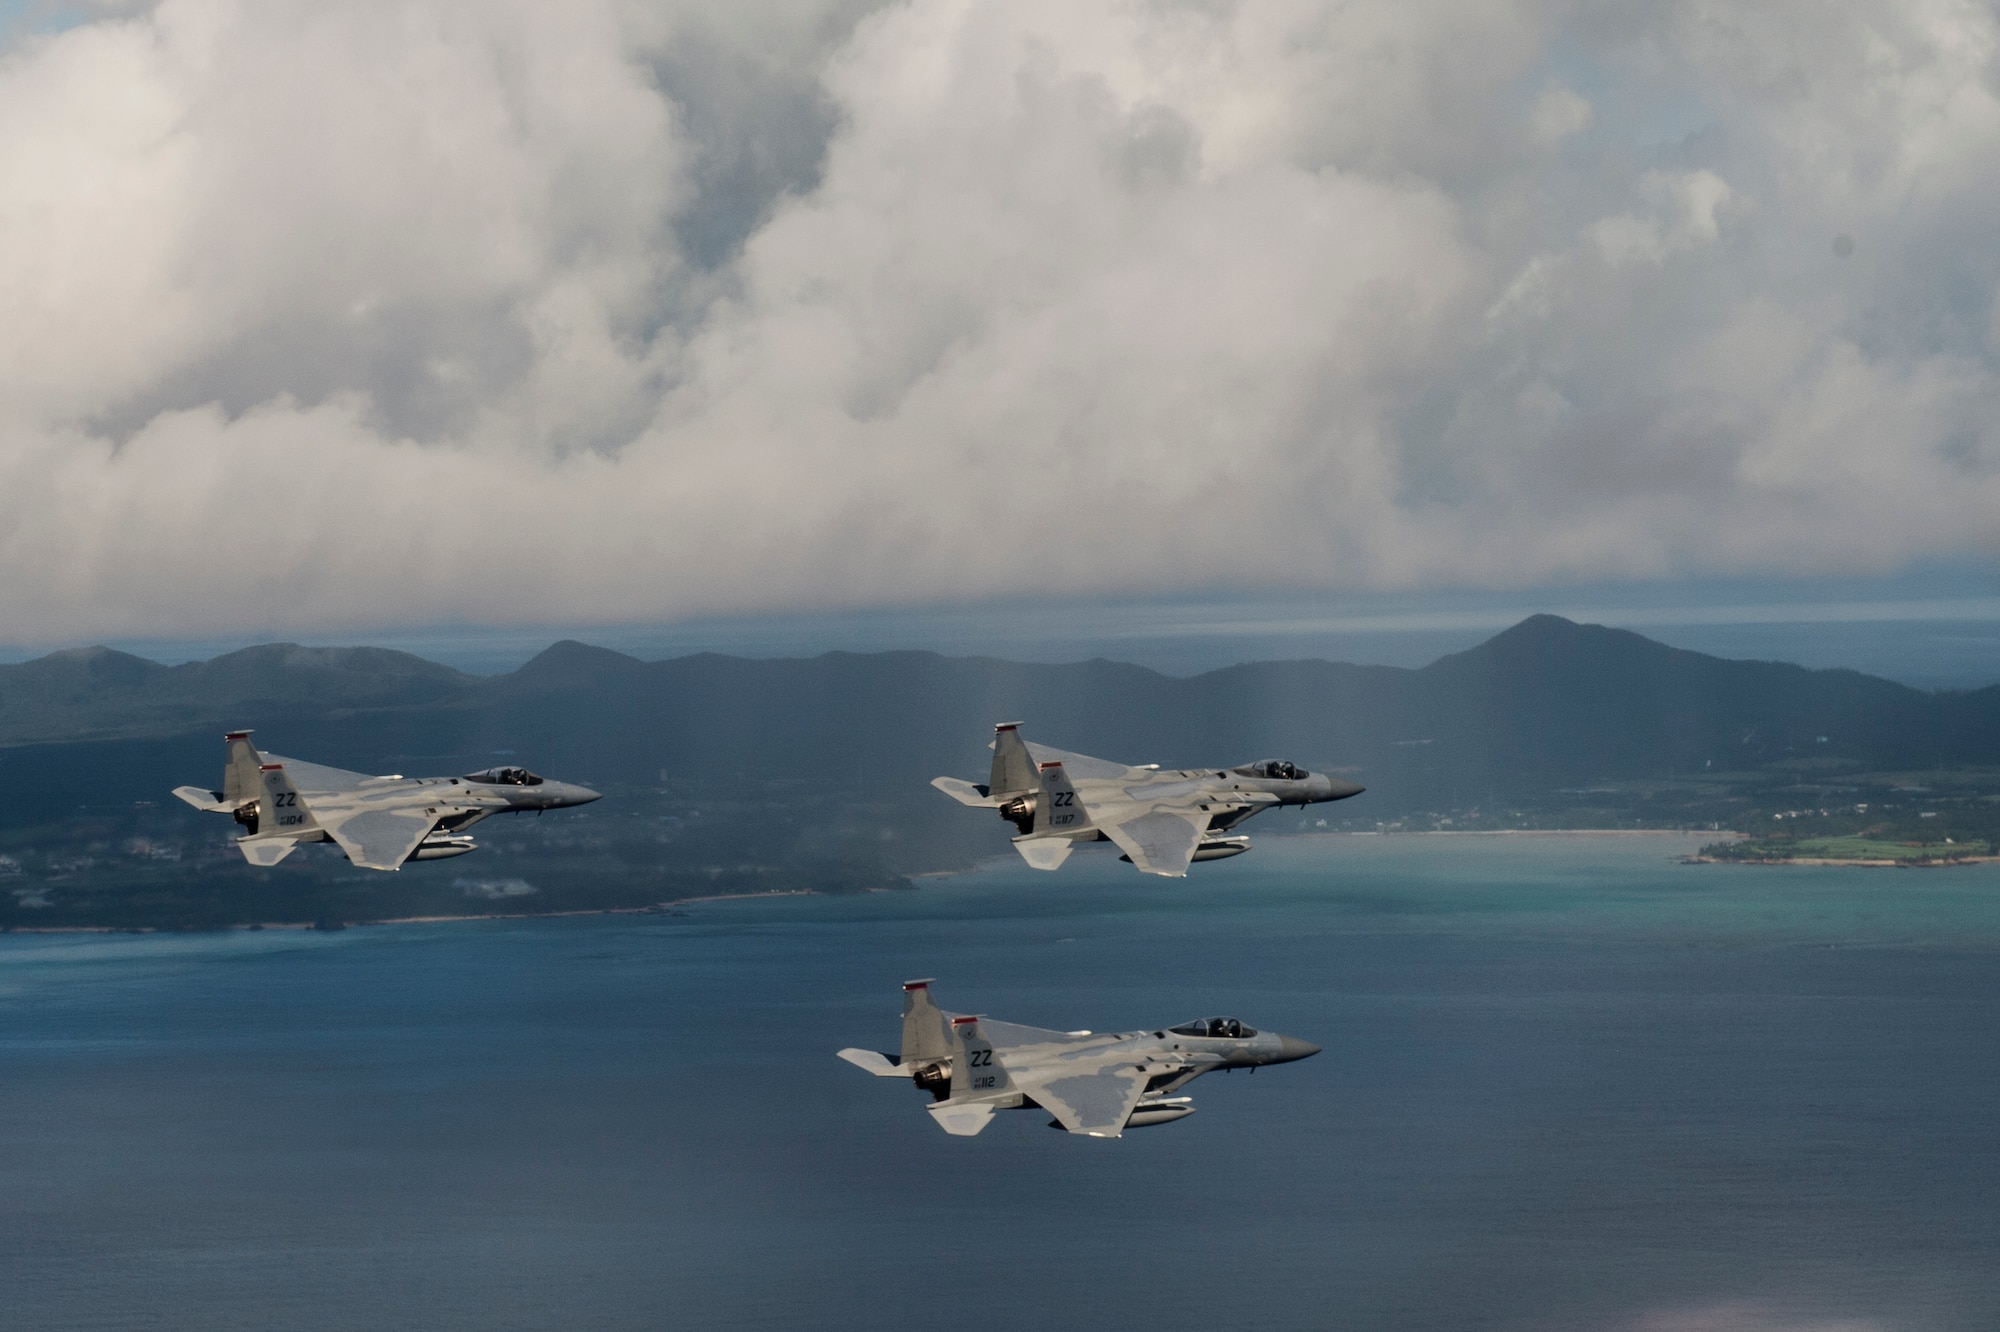 U.S. Air Force F-15 Eagles from the 67th Fighter Squadron fly a training mission over the Pacific Ocean outside of Kadena Air Base, Japan, Aug. 25, 2014. The 67th FS has been a part of Kadena's team since March 15, 1971, and provides air defense and air superiority in the Asian-Western Pacific area of operations. (U.S. Air Force photo by Staff Sgt. Stephany Richards/Released)